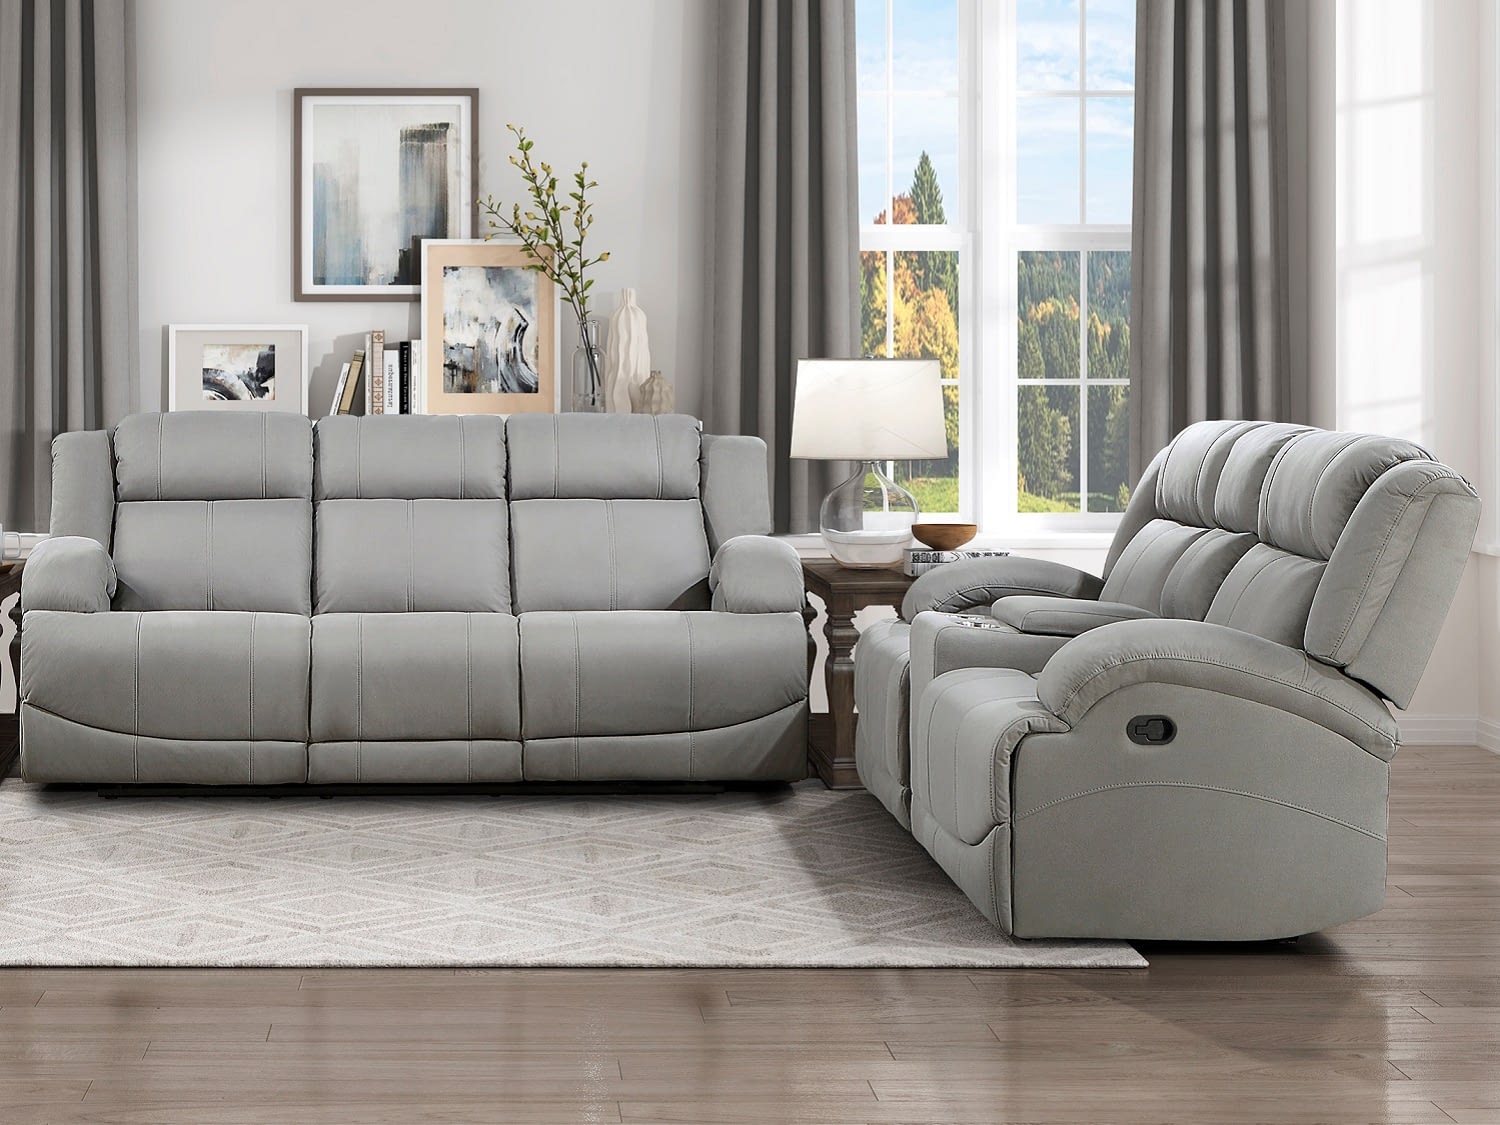 QUINCY Reclining Sofa Loveseat with Console Closed